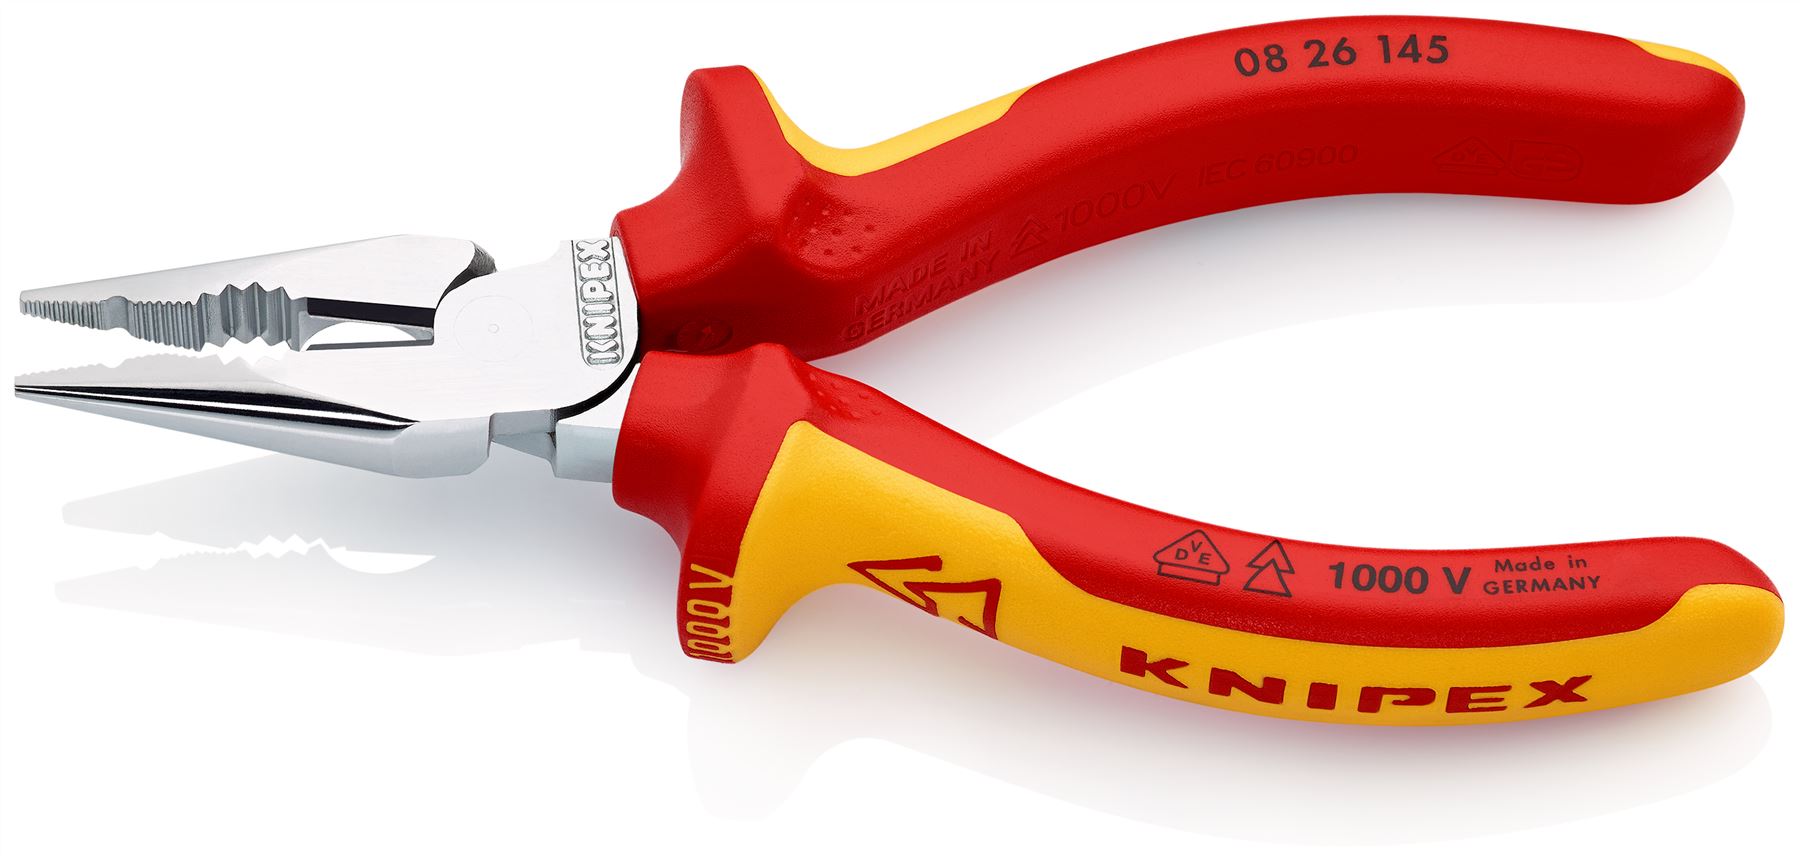 KNIPEX Needle Nose Combination Pliers 145mm VDE Chrome Multi Component Grips 08 26 145 SB